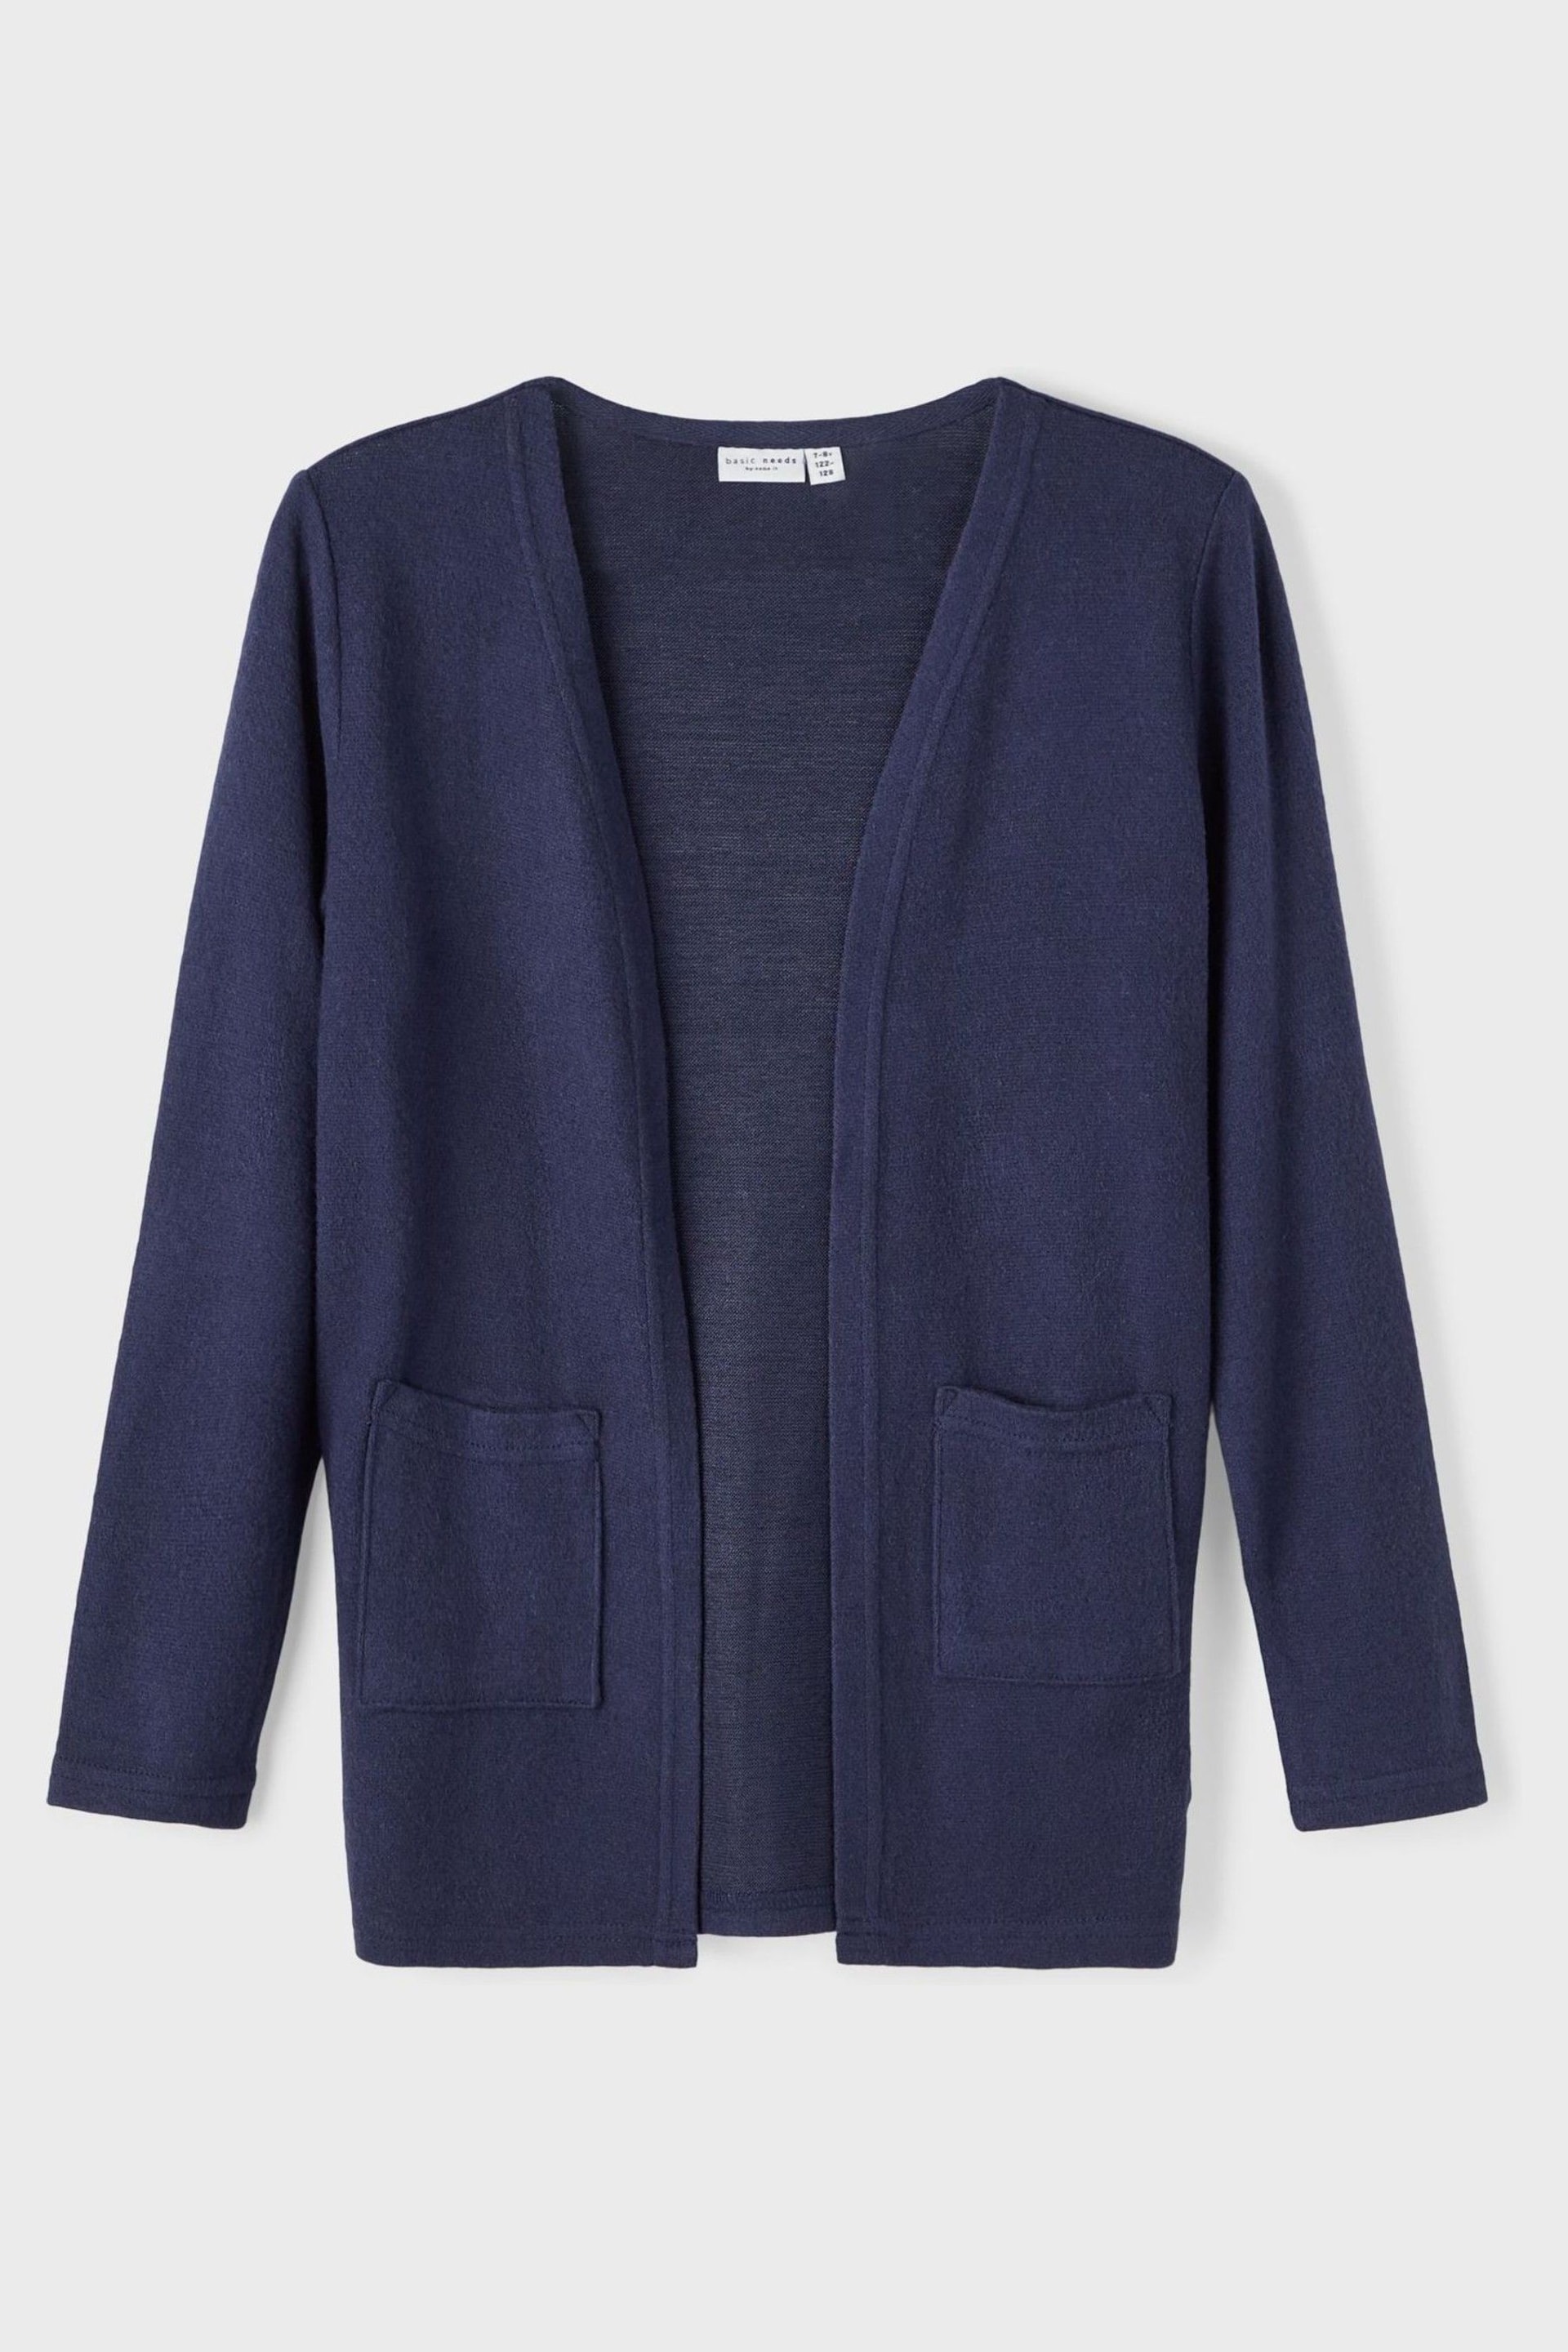 Name It Blue Knitted Cardigan with Pockets - Image 2 of 4